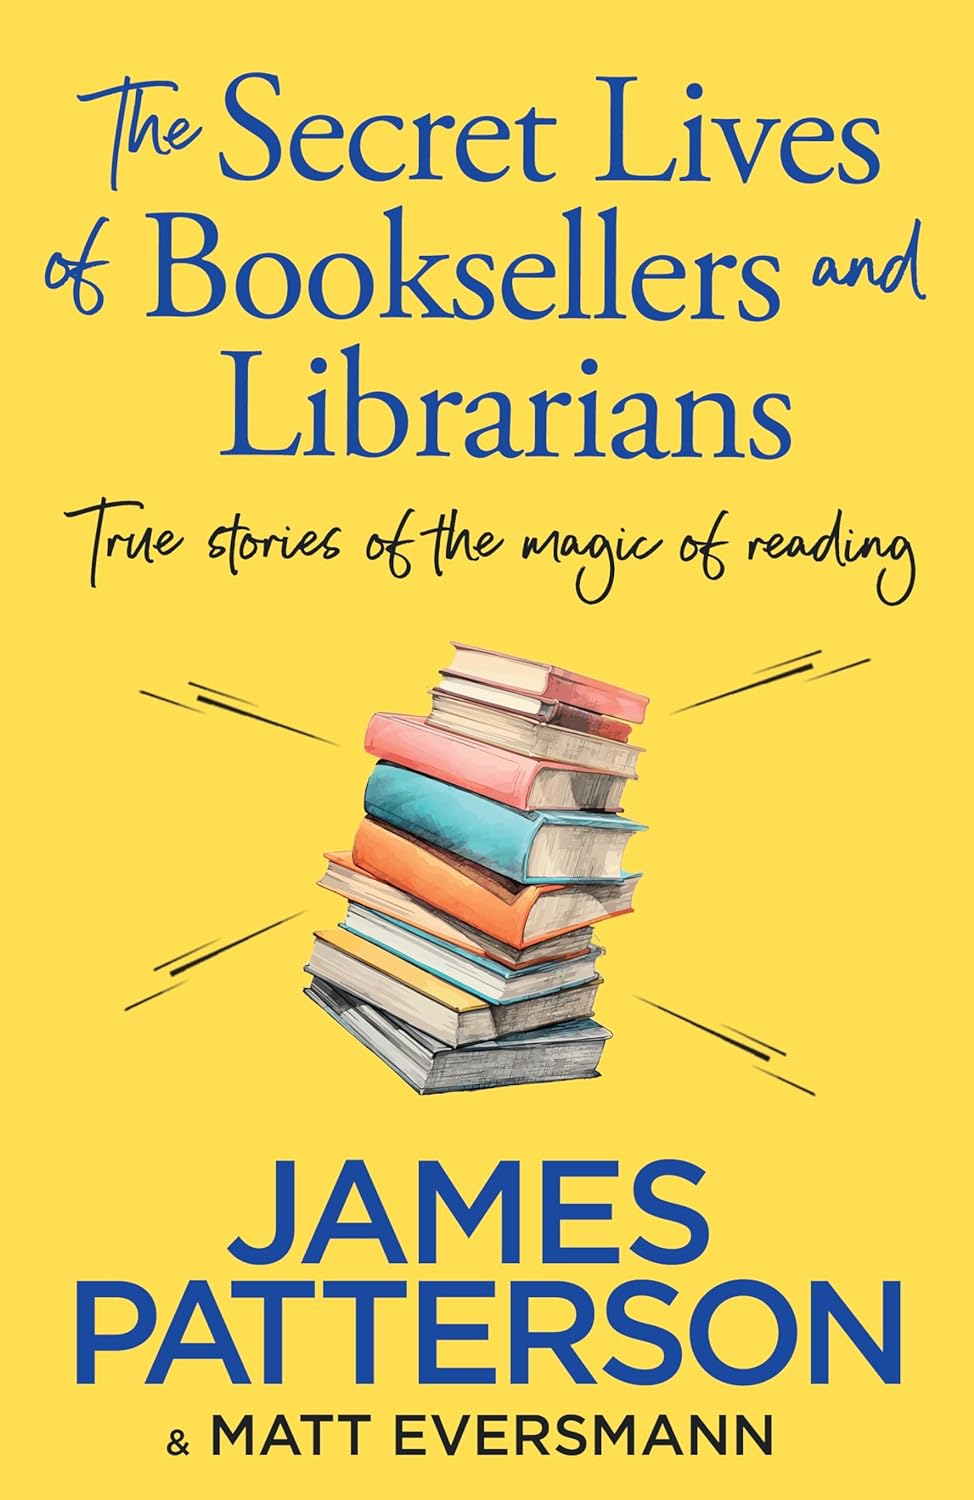 The_Secret_lives_of_Booksellers_and_Librarians_book_Cover.